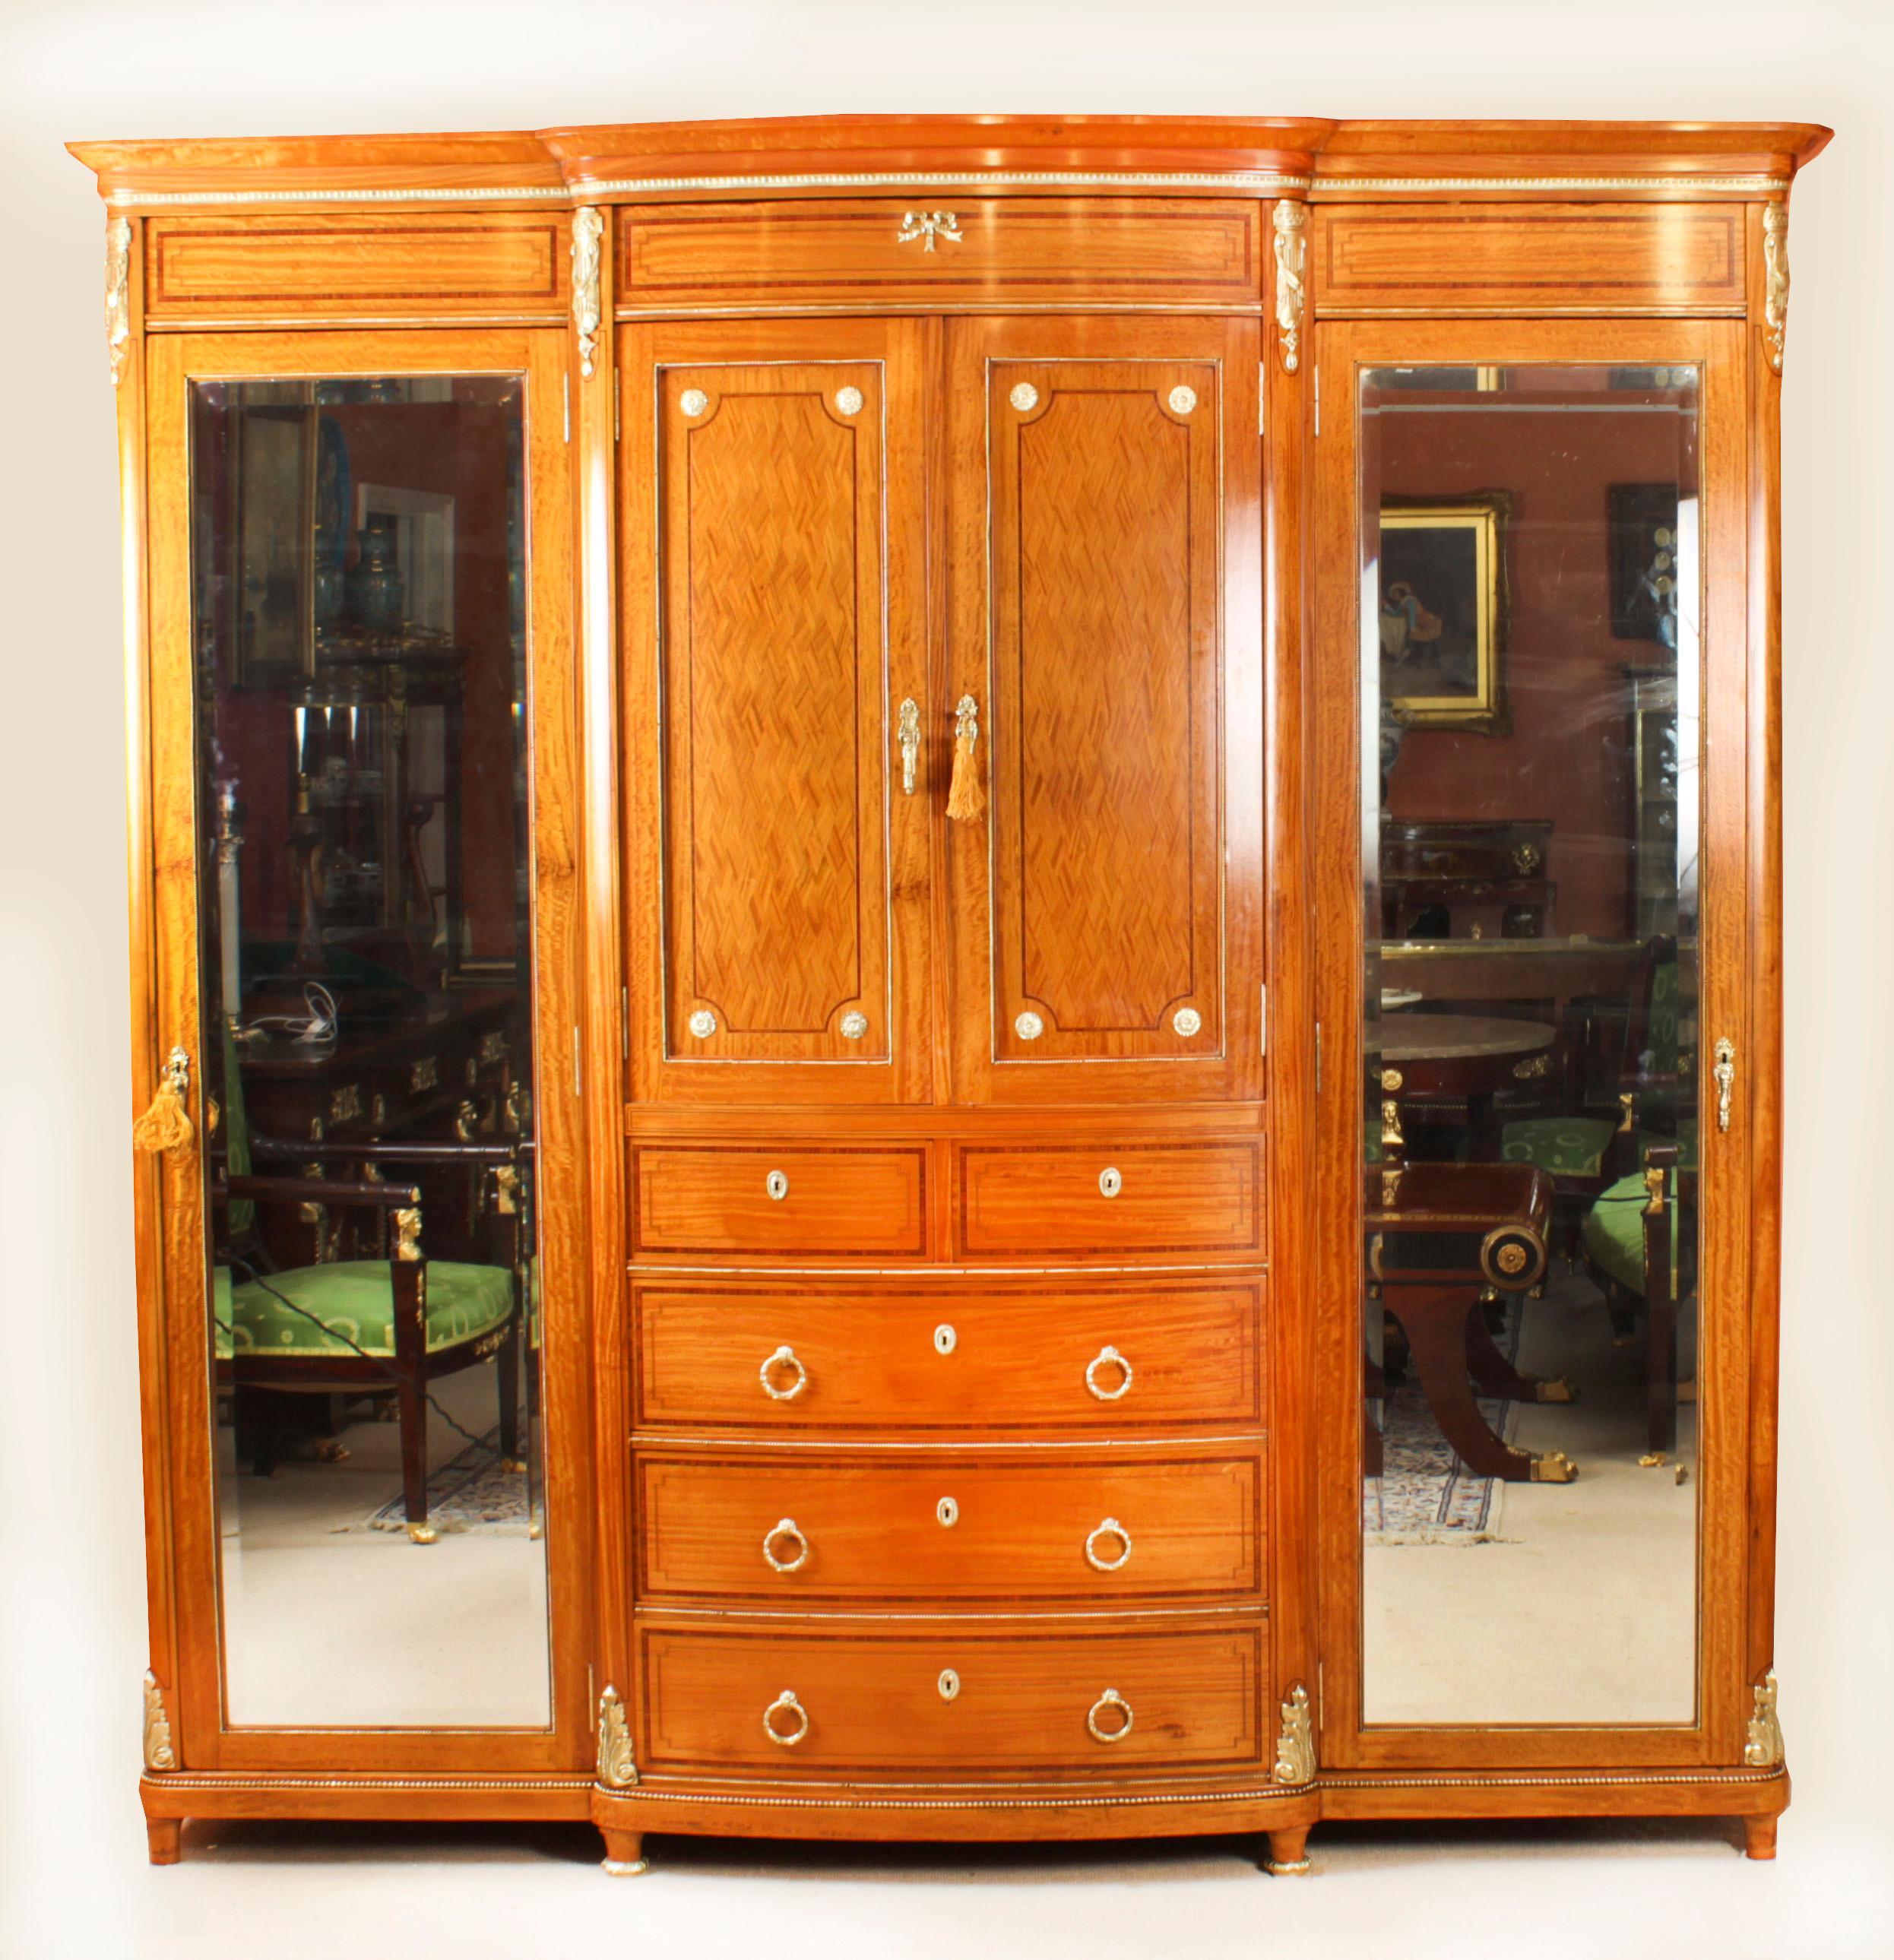 This is a large, rare, and impressive, antique French satinwood, wood banded, parquetry inlaid and ormolu mounted compactum wardrobe, circa 1880 in date.
 
The central section has a pair of panelled cupboard doors superbly inlaid with diamond